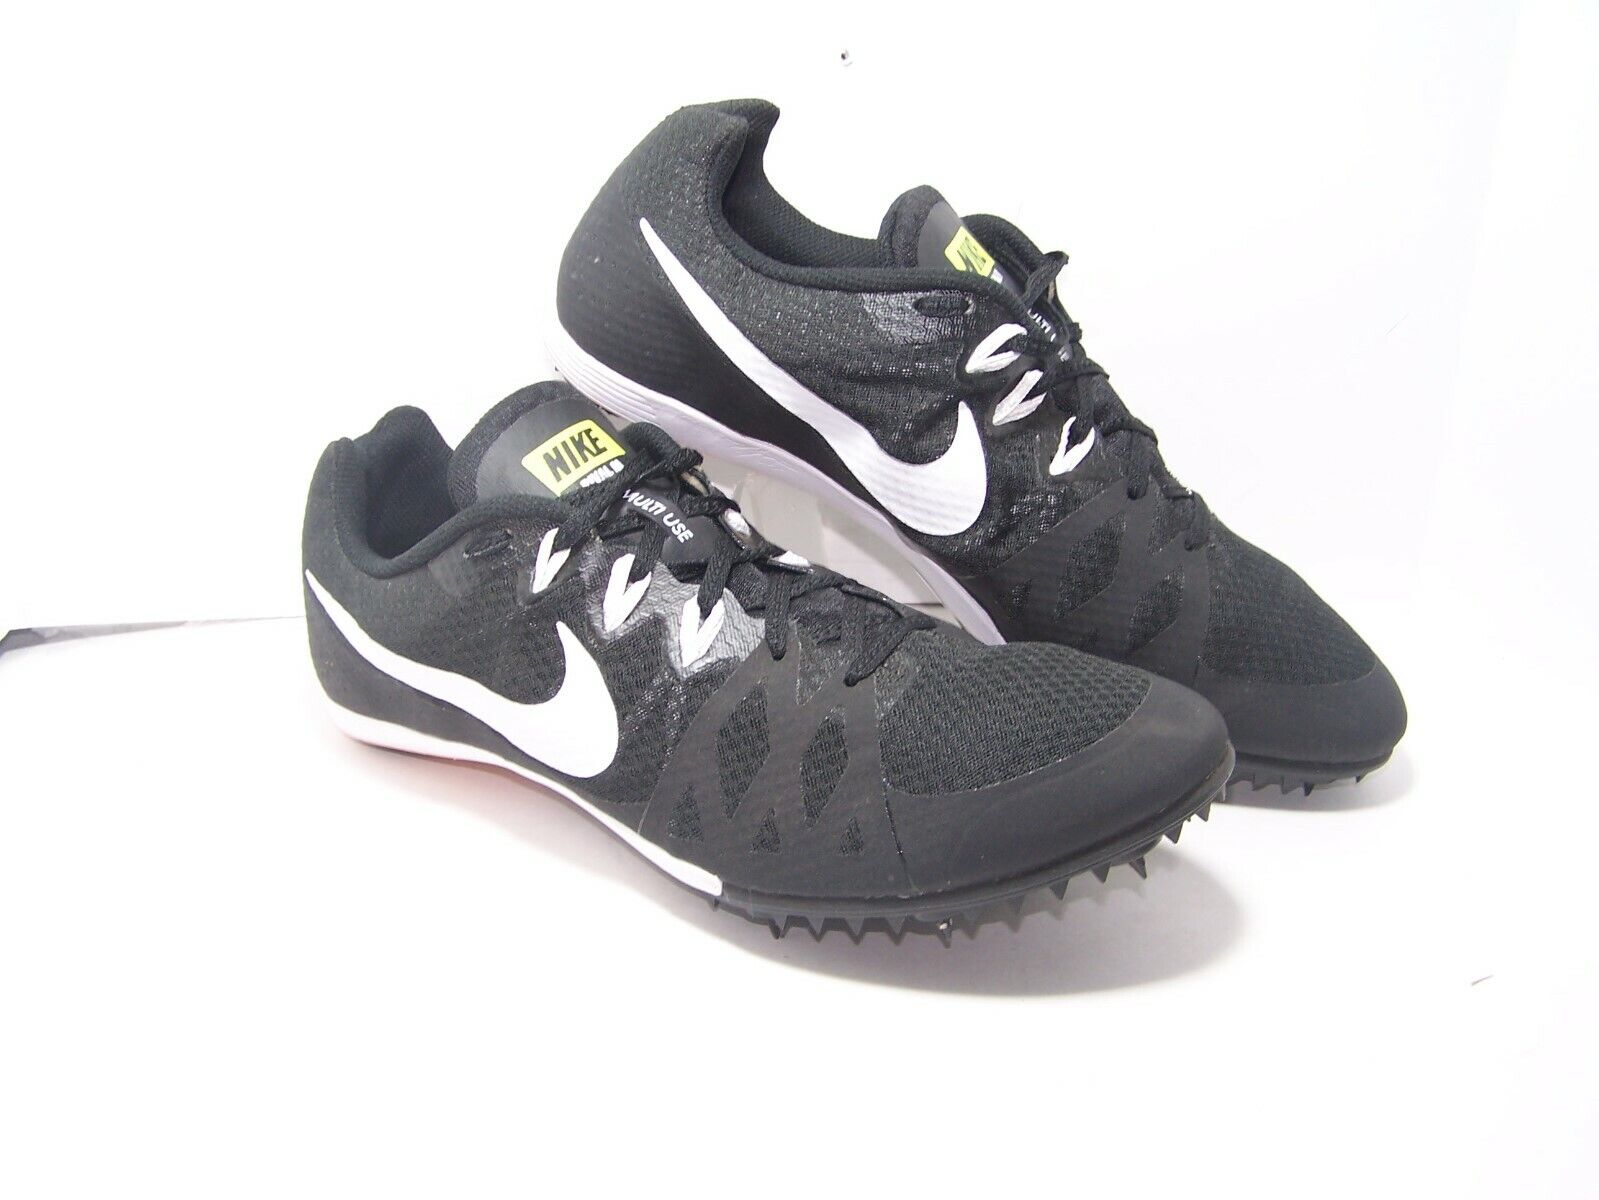 Nike Zoom Rival M8 Black White 806555-017 Field Spikes Mens Size 12 |